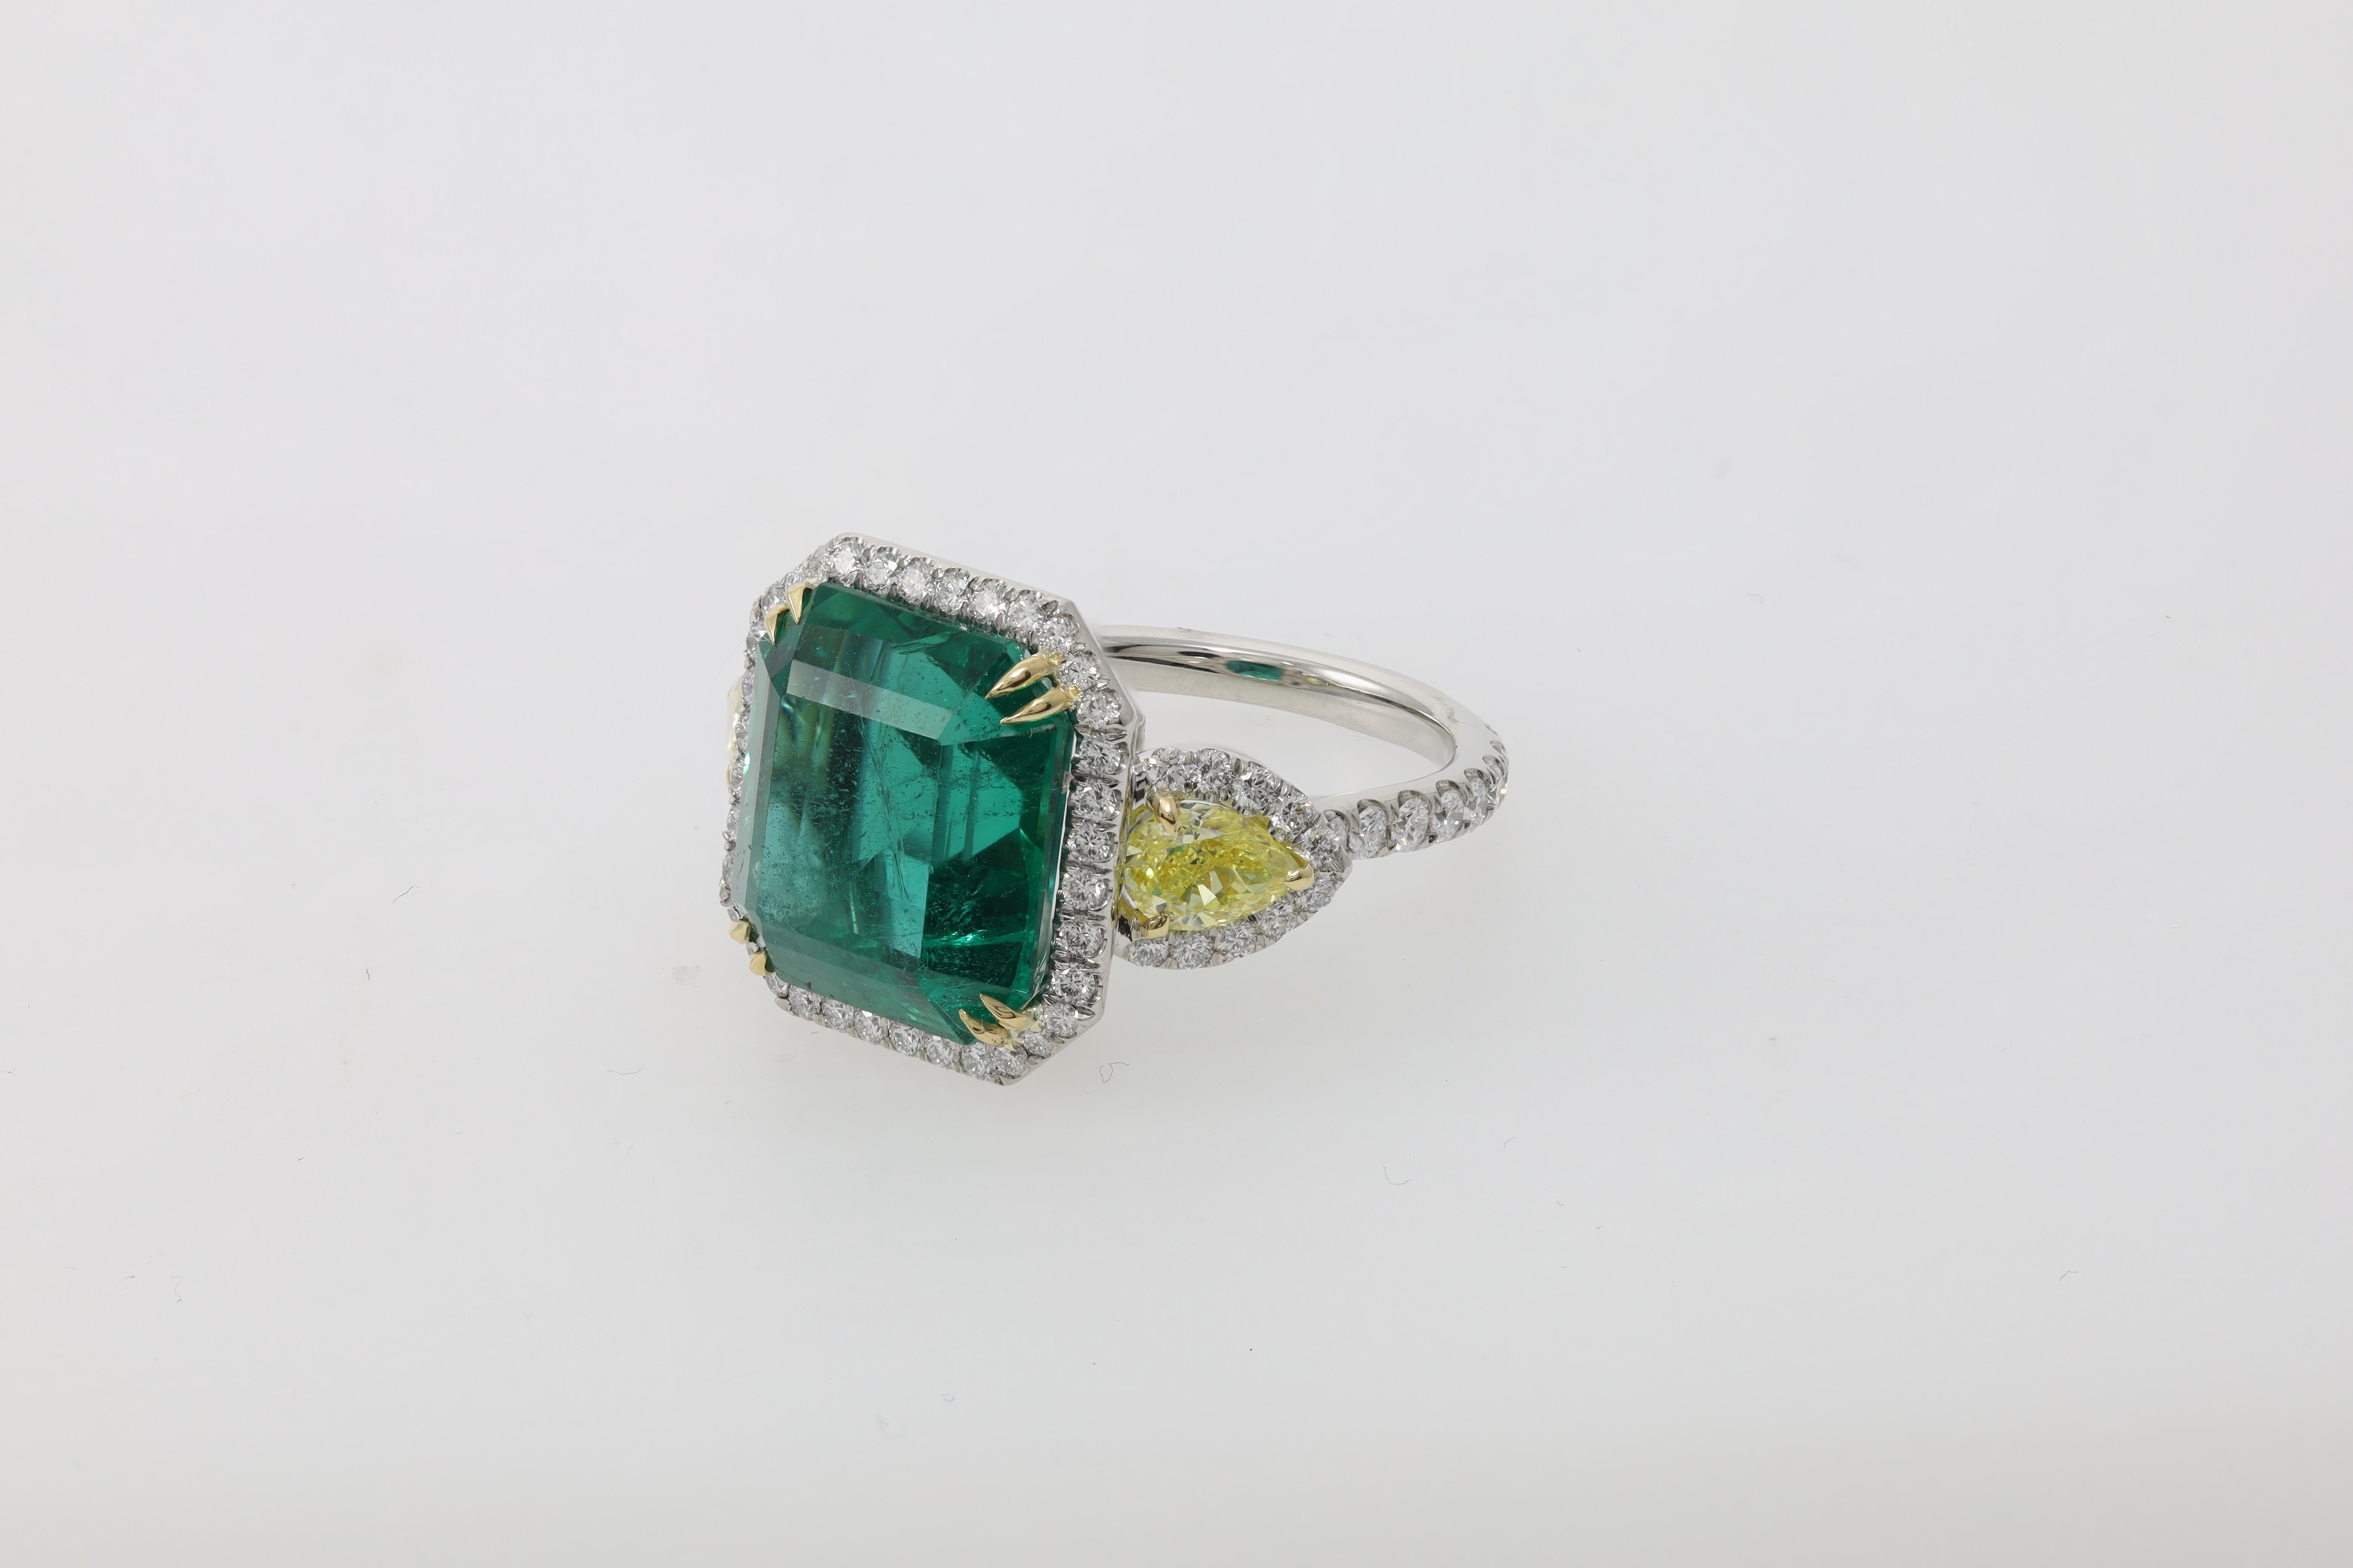 Emerald Cut Diana M. Platinum and 18 kt yellow gold emerald diamond ring featuring a 13.69  For Sale